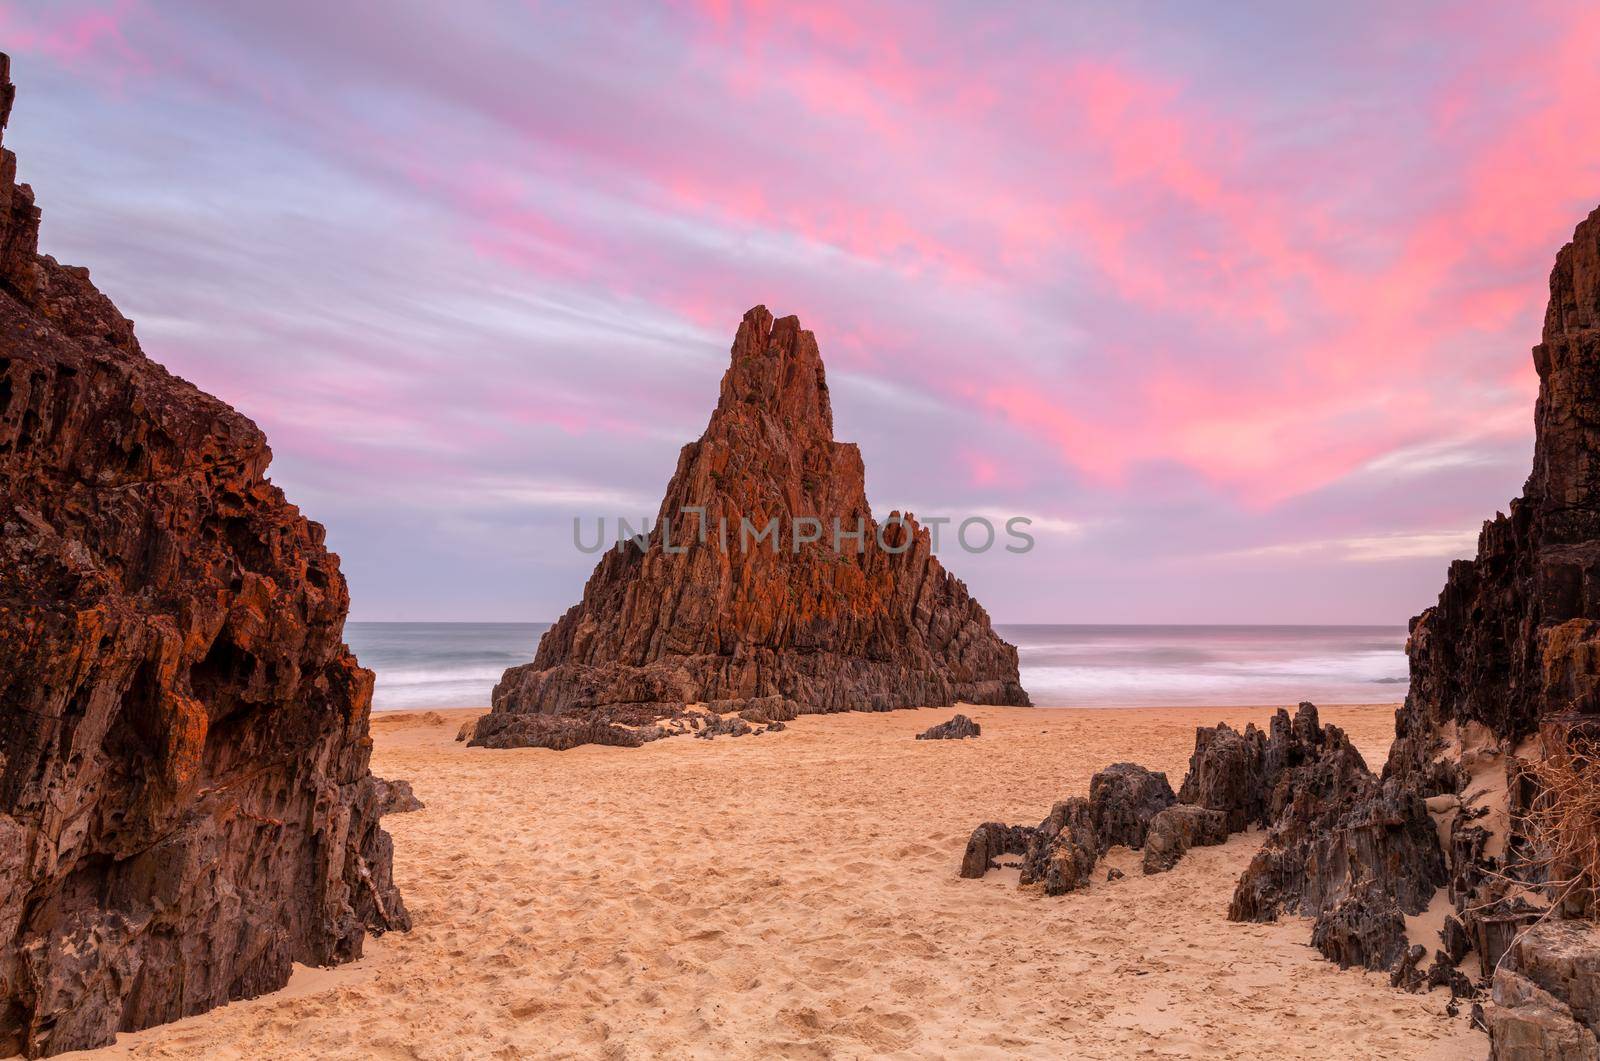 Sunset at the pyrmid rock on south coast of NSW by lovleah